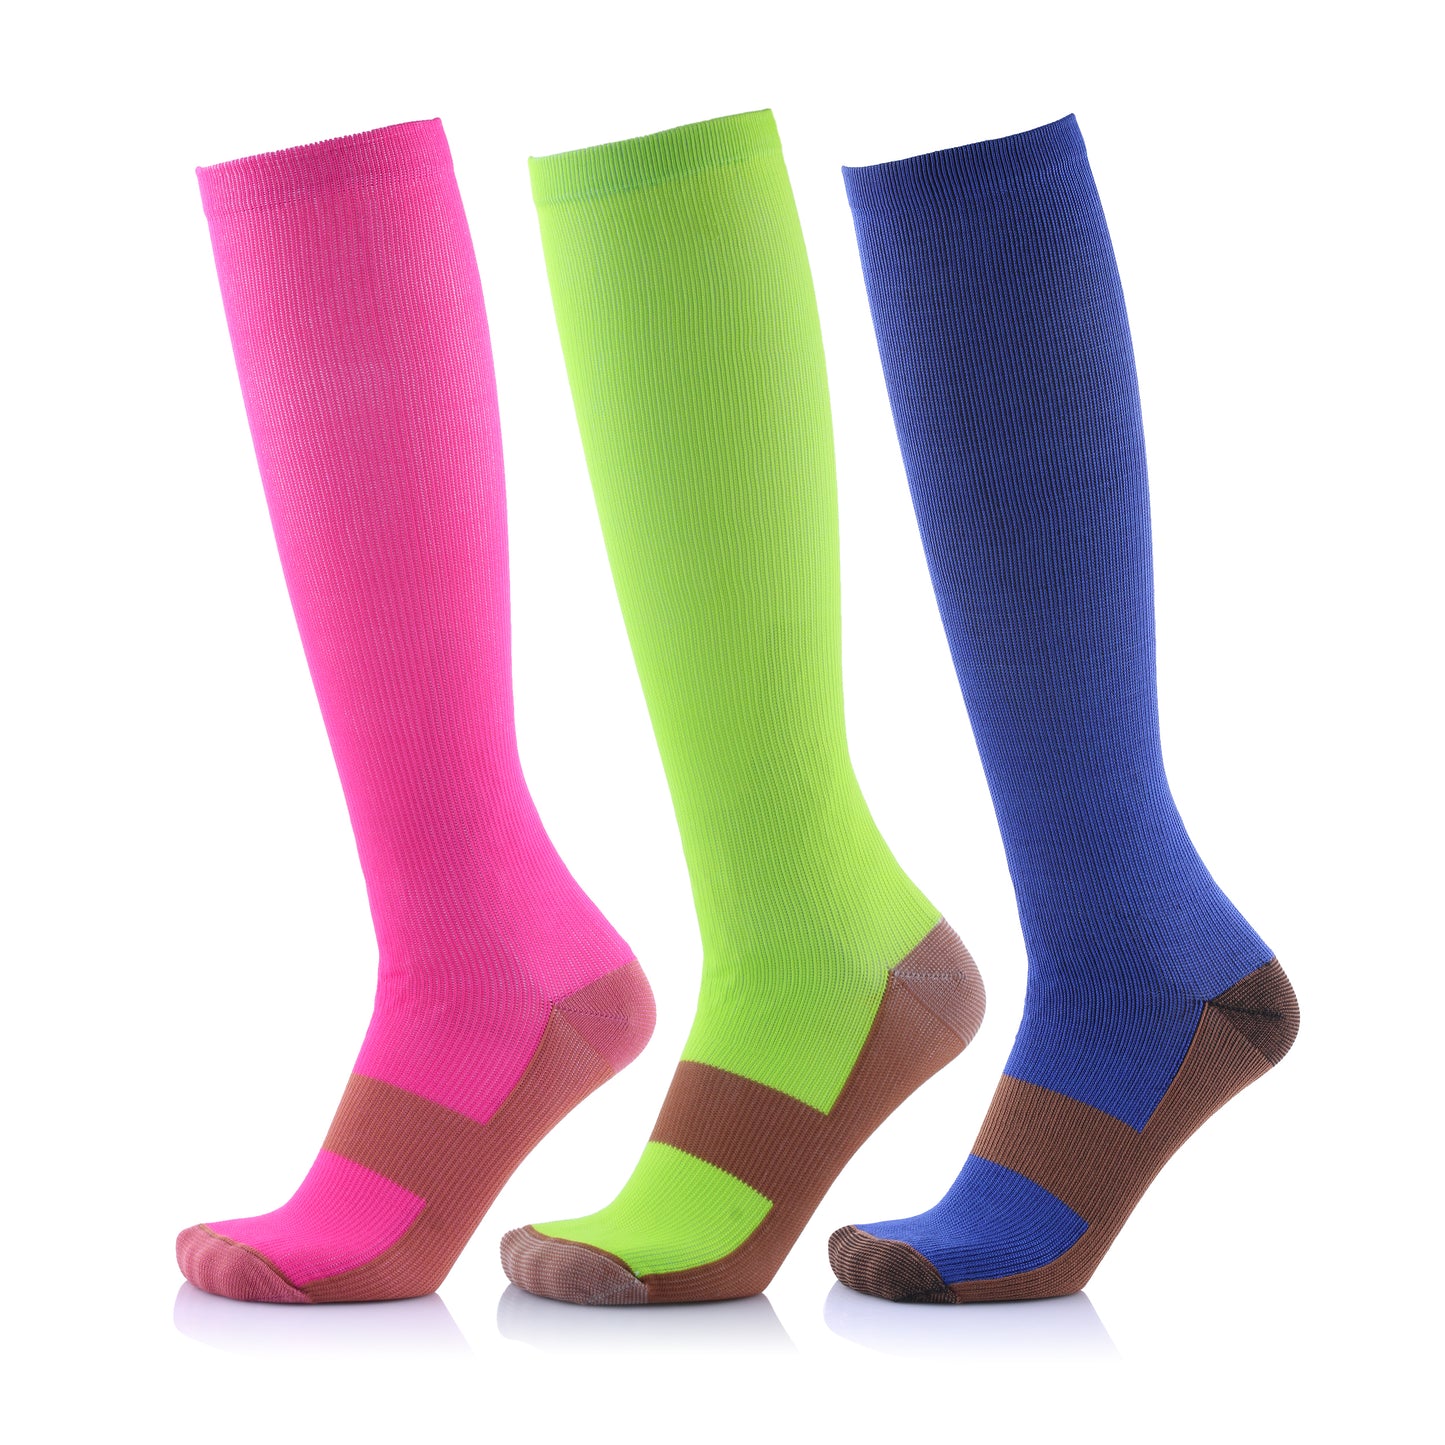 6 pairs of COPPER Compression Socks Mix Colors S/M